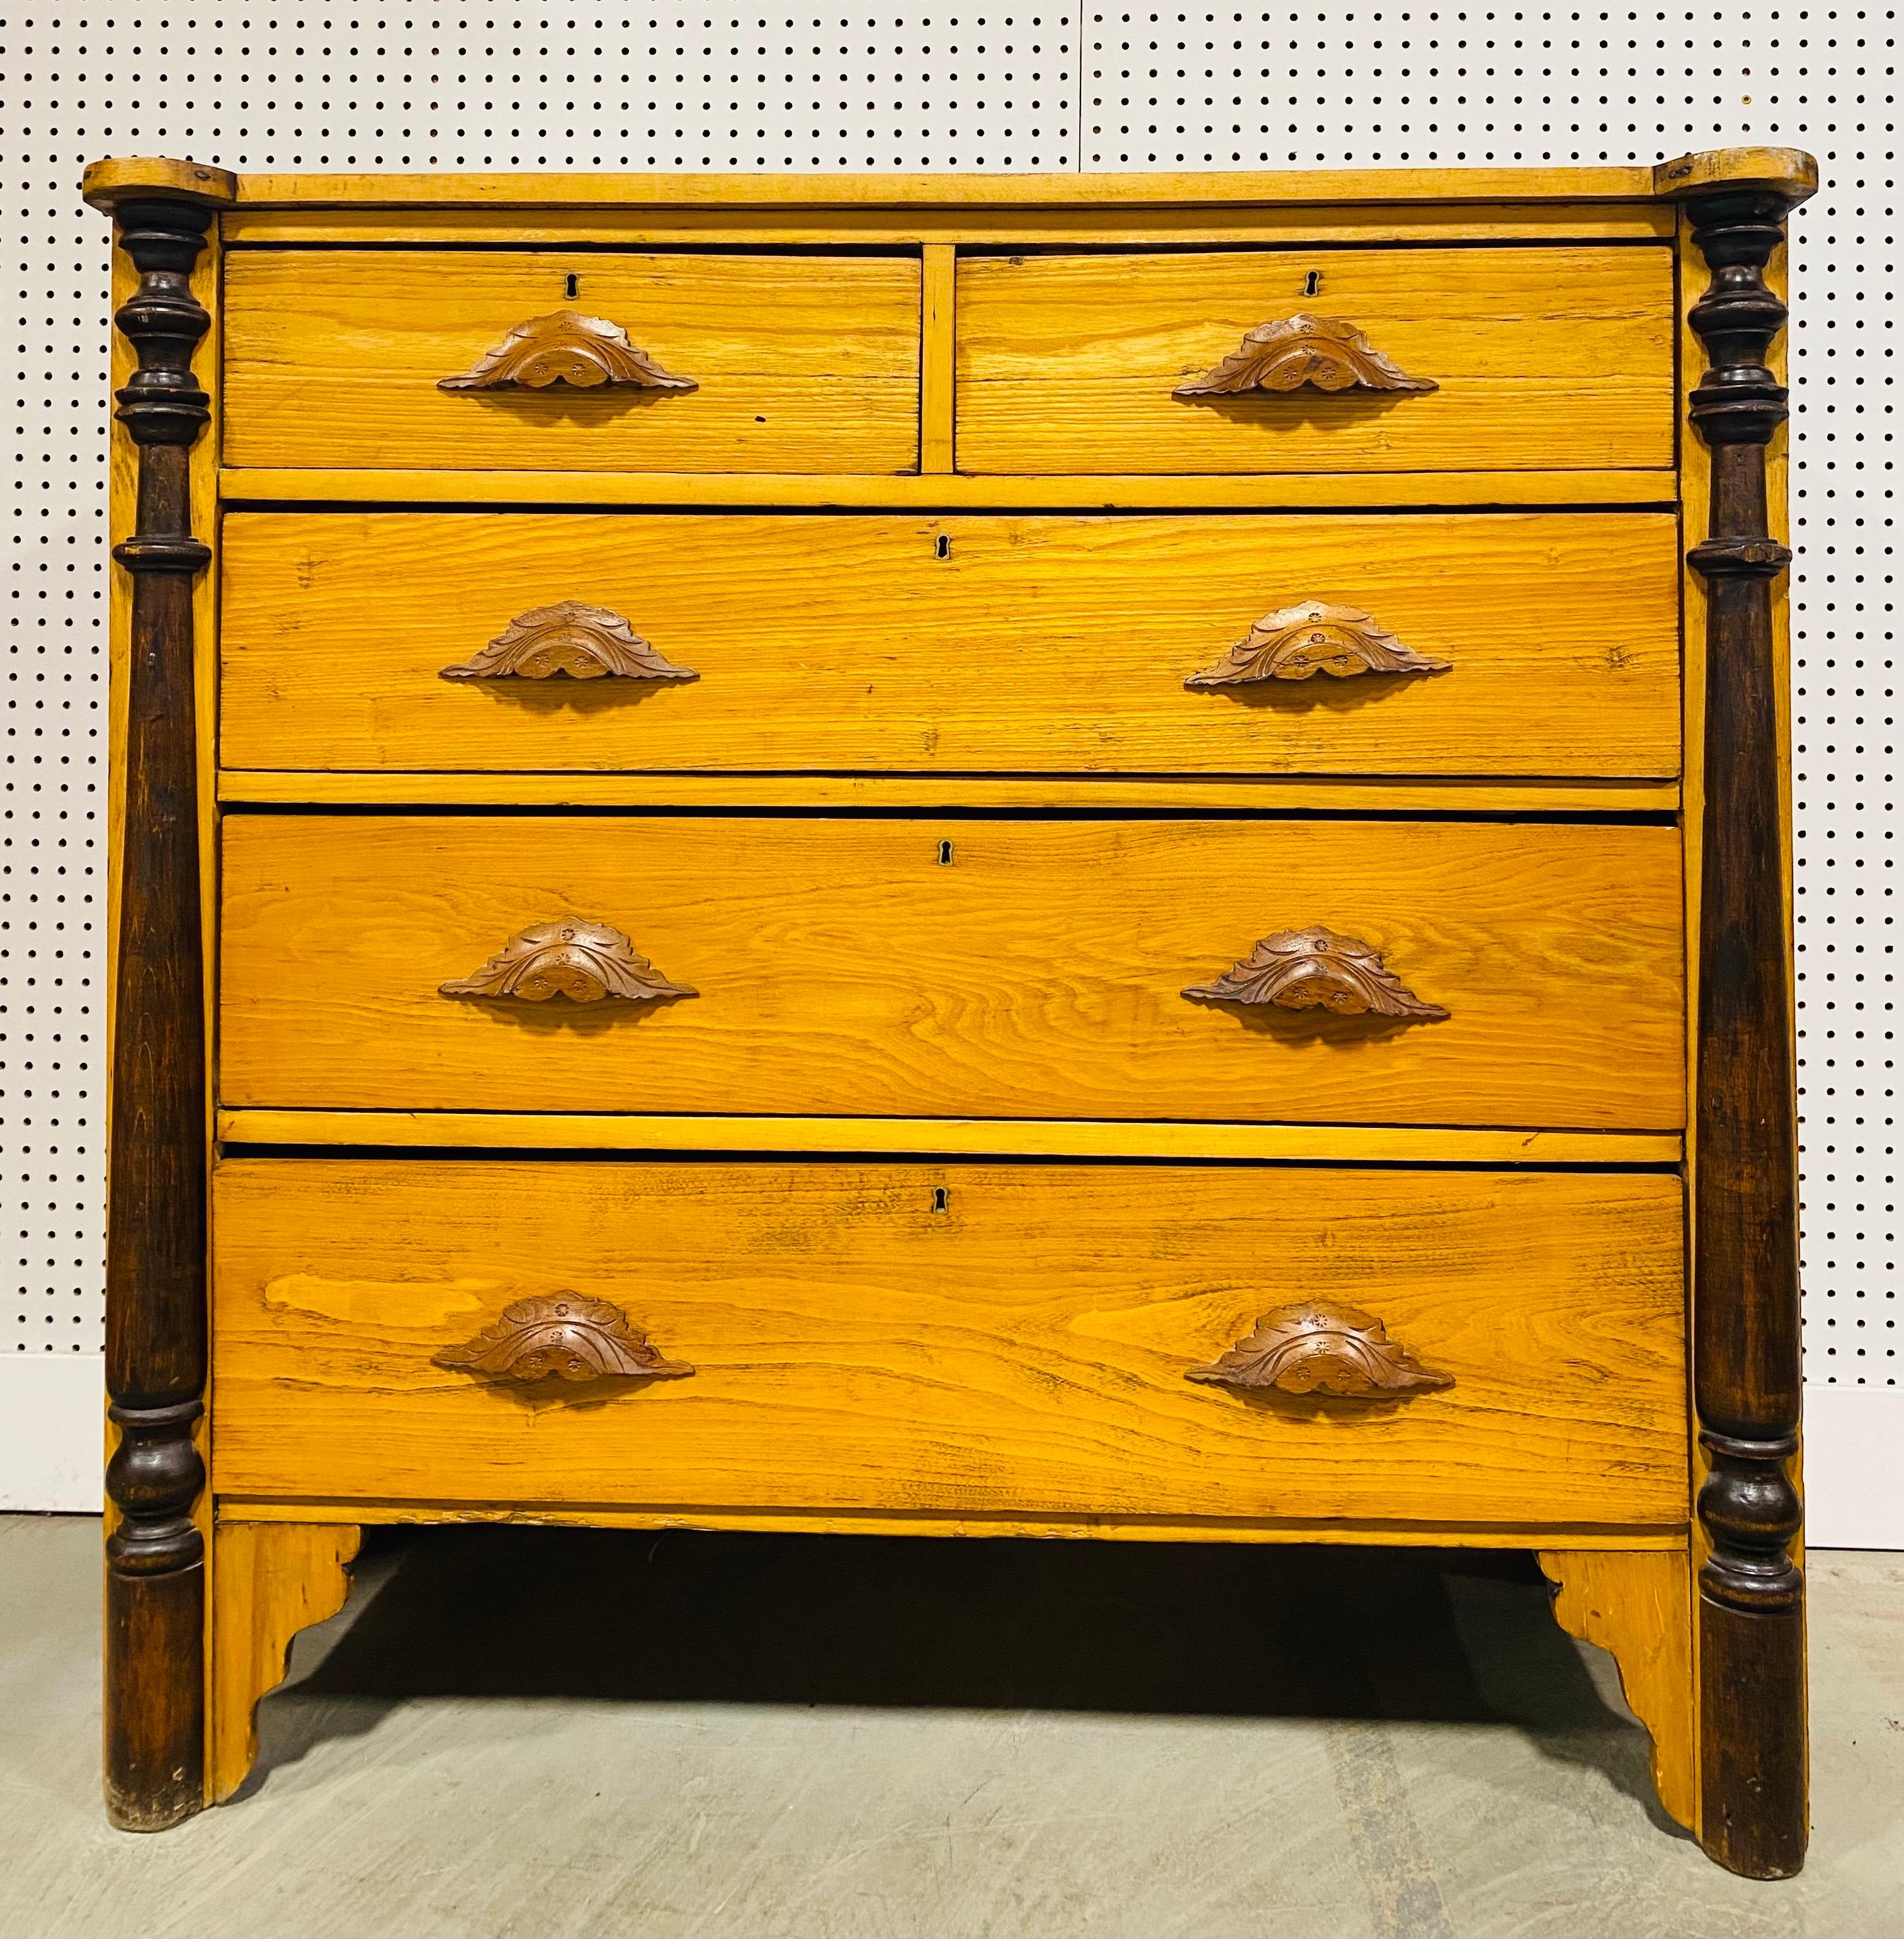 Late 19th century handcrafted rustic pine chest of drawers For Sale 2